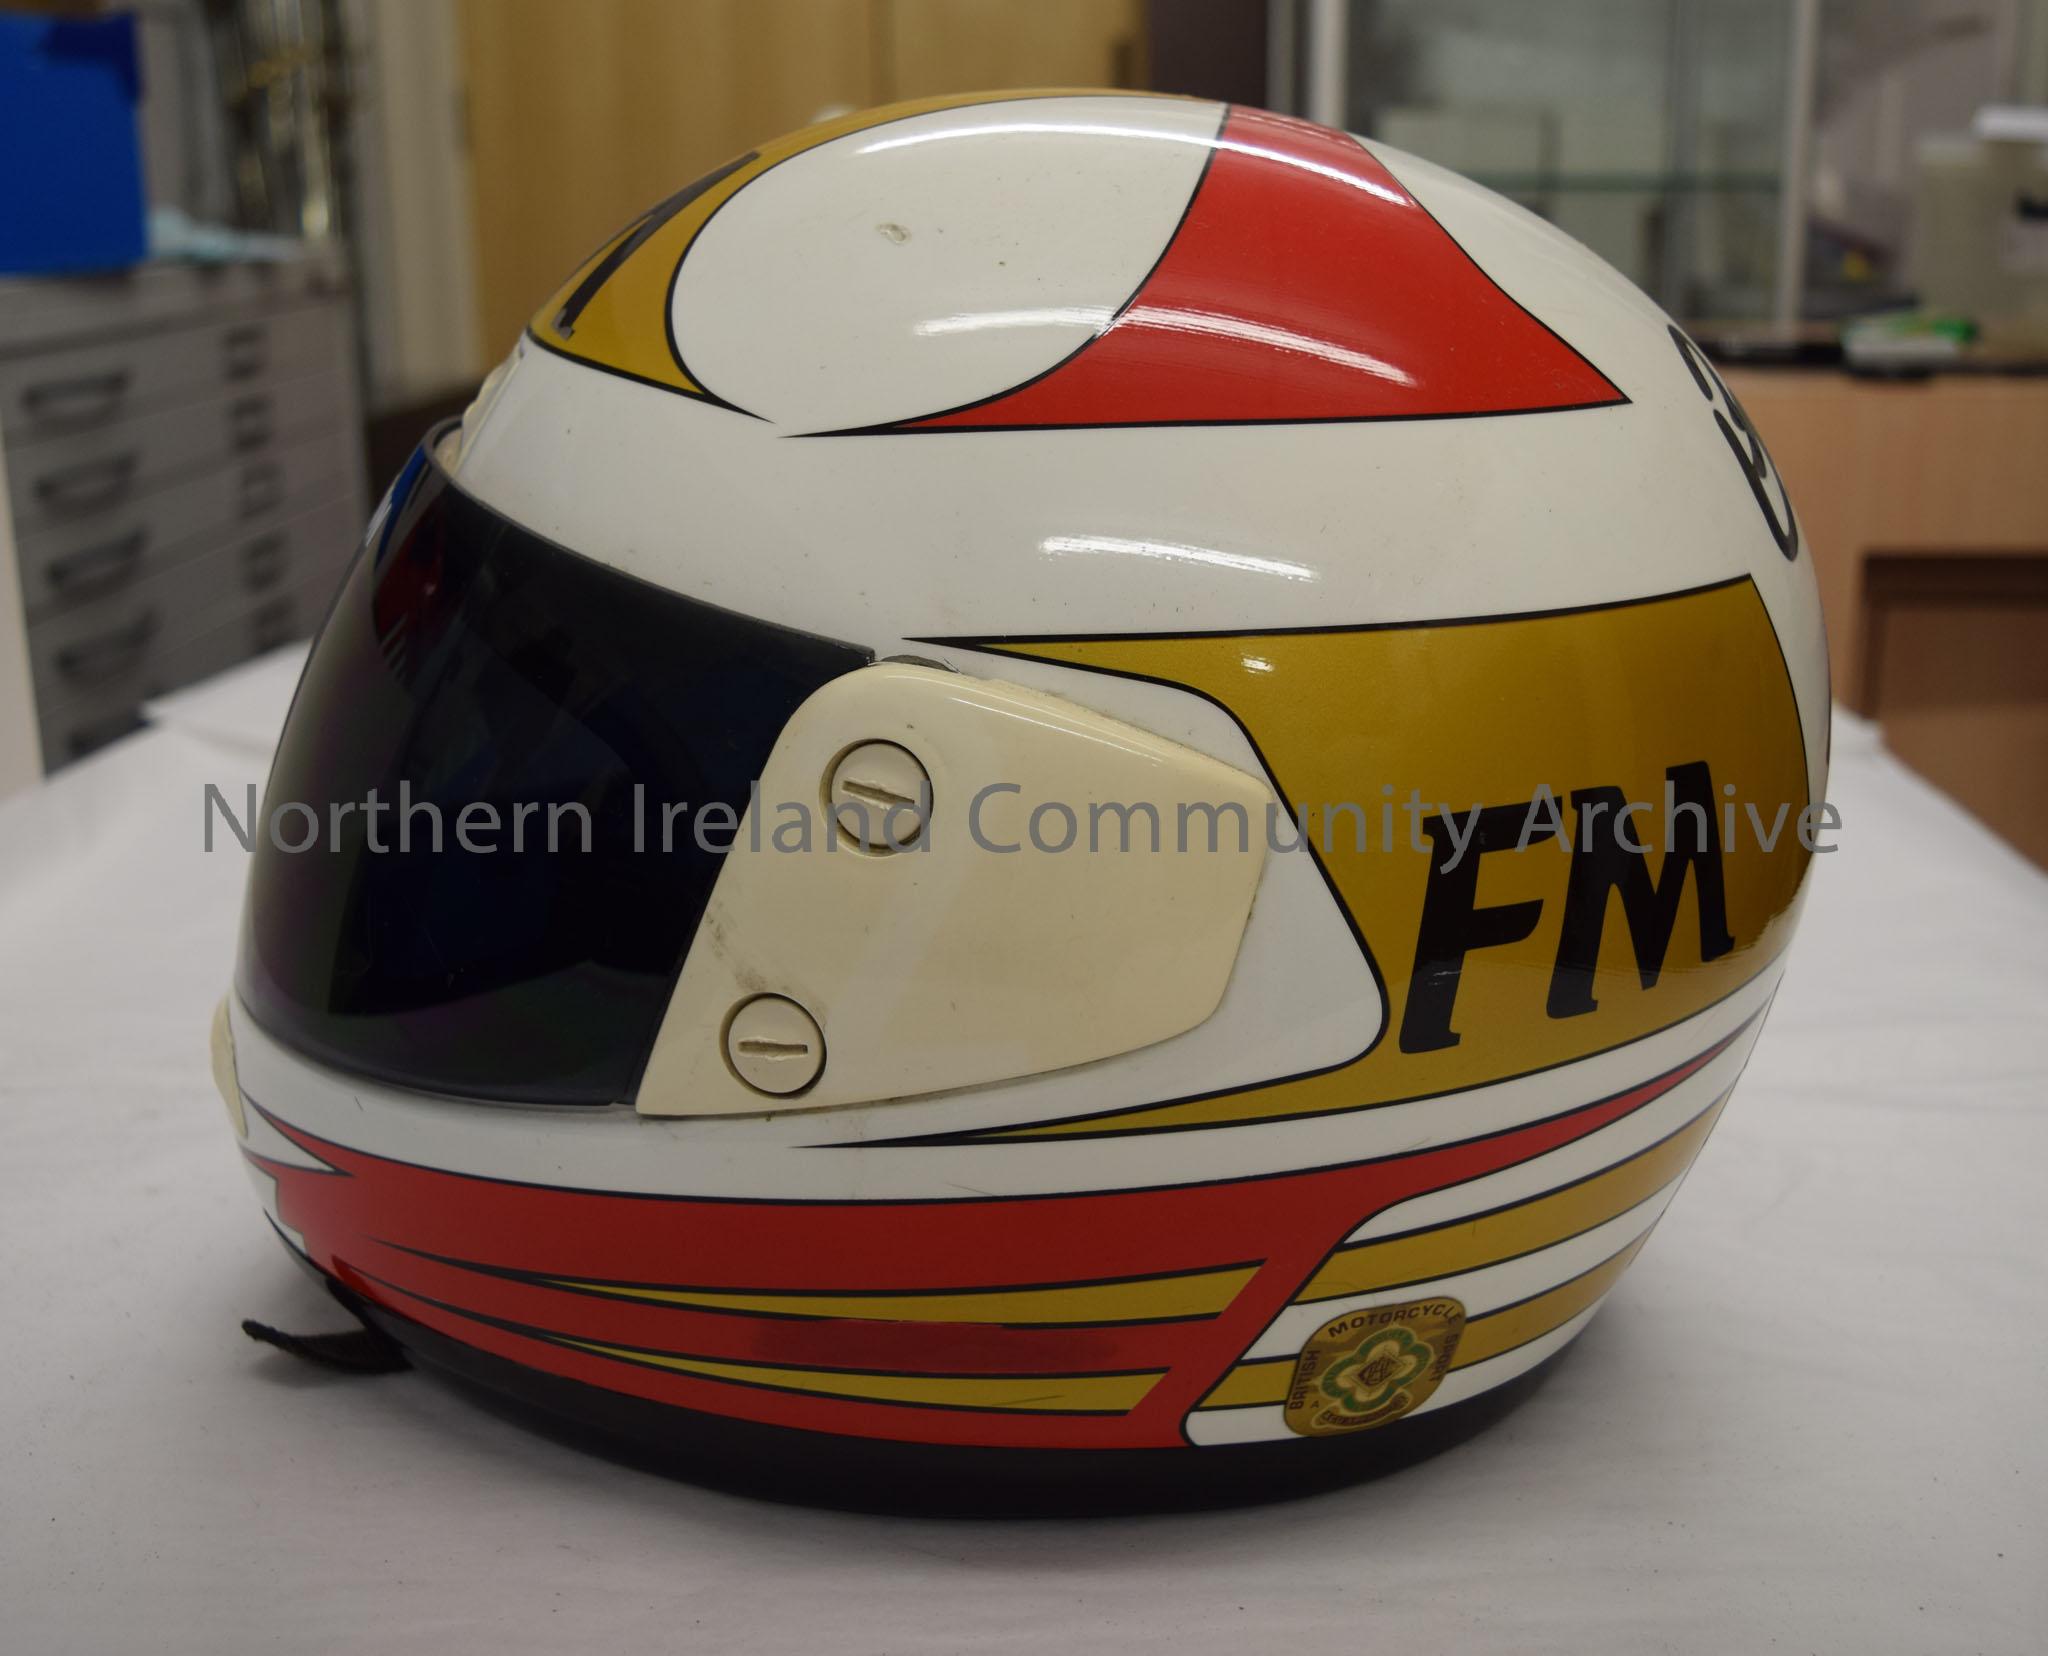 FM motorcycle helmet belonging to Brian Morrison. White helmet with gold and red pattern and gold and red stripes along the bottom. FM written in blac… – 2016.58 (3)